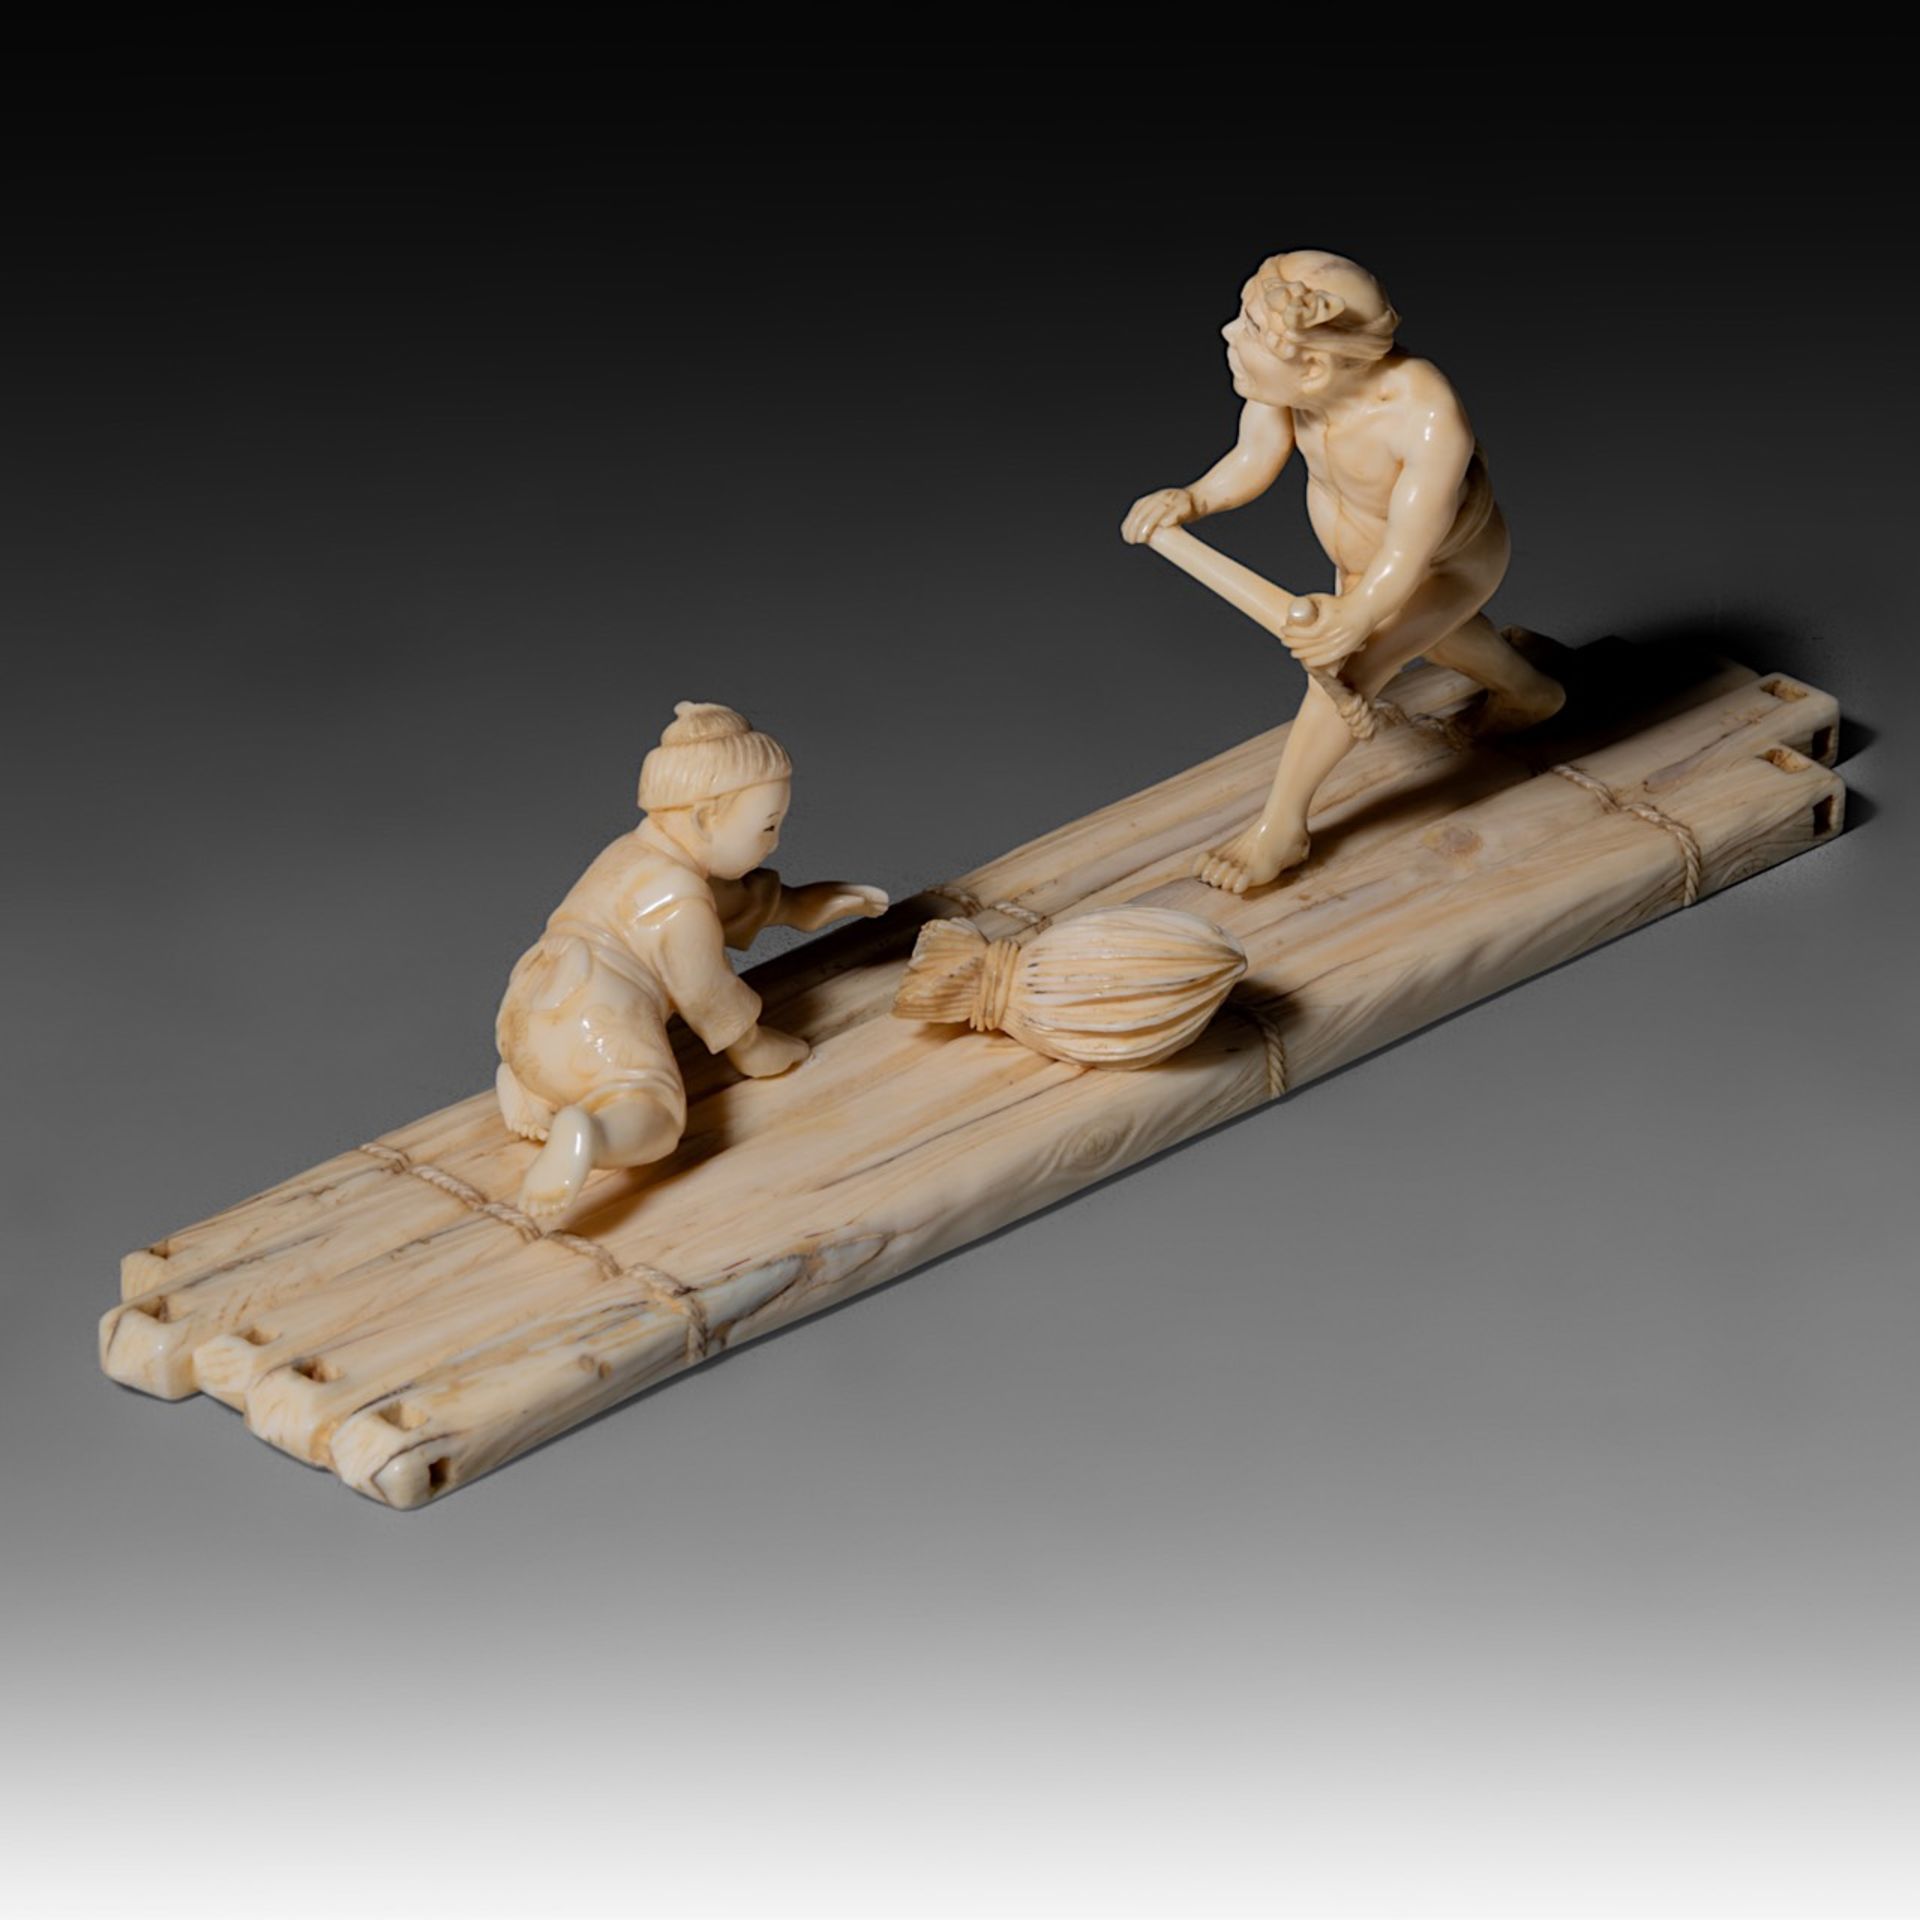 Two Japanese Meiji-period (1868-1912) ivory okimono; one depicts a man rowing a raft while a child s - Image 4 of 19